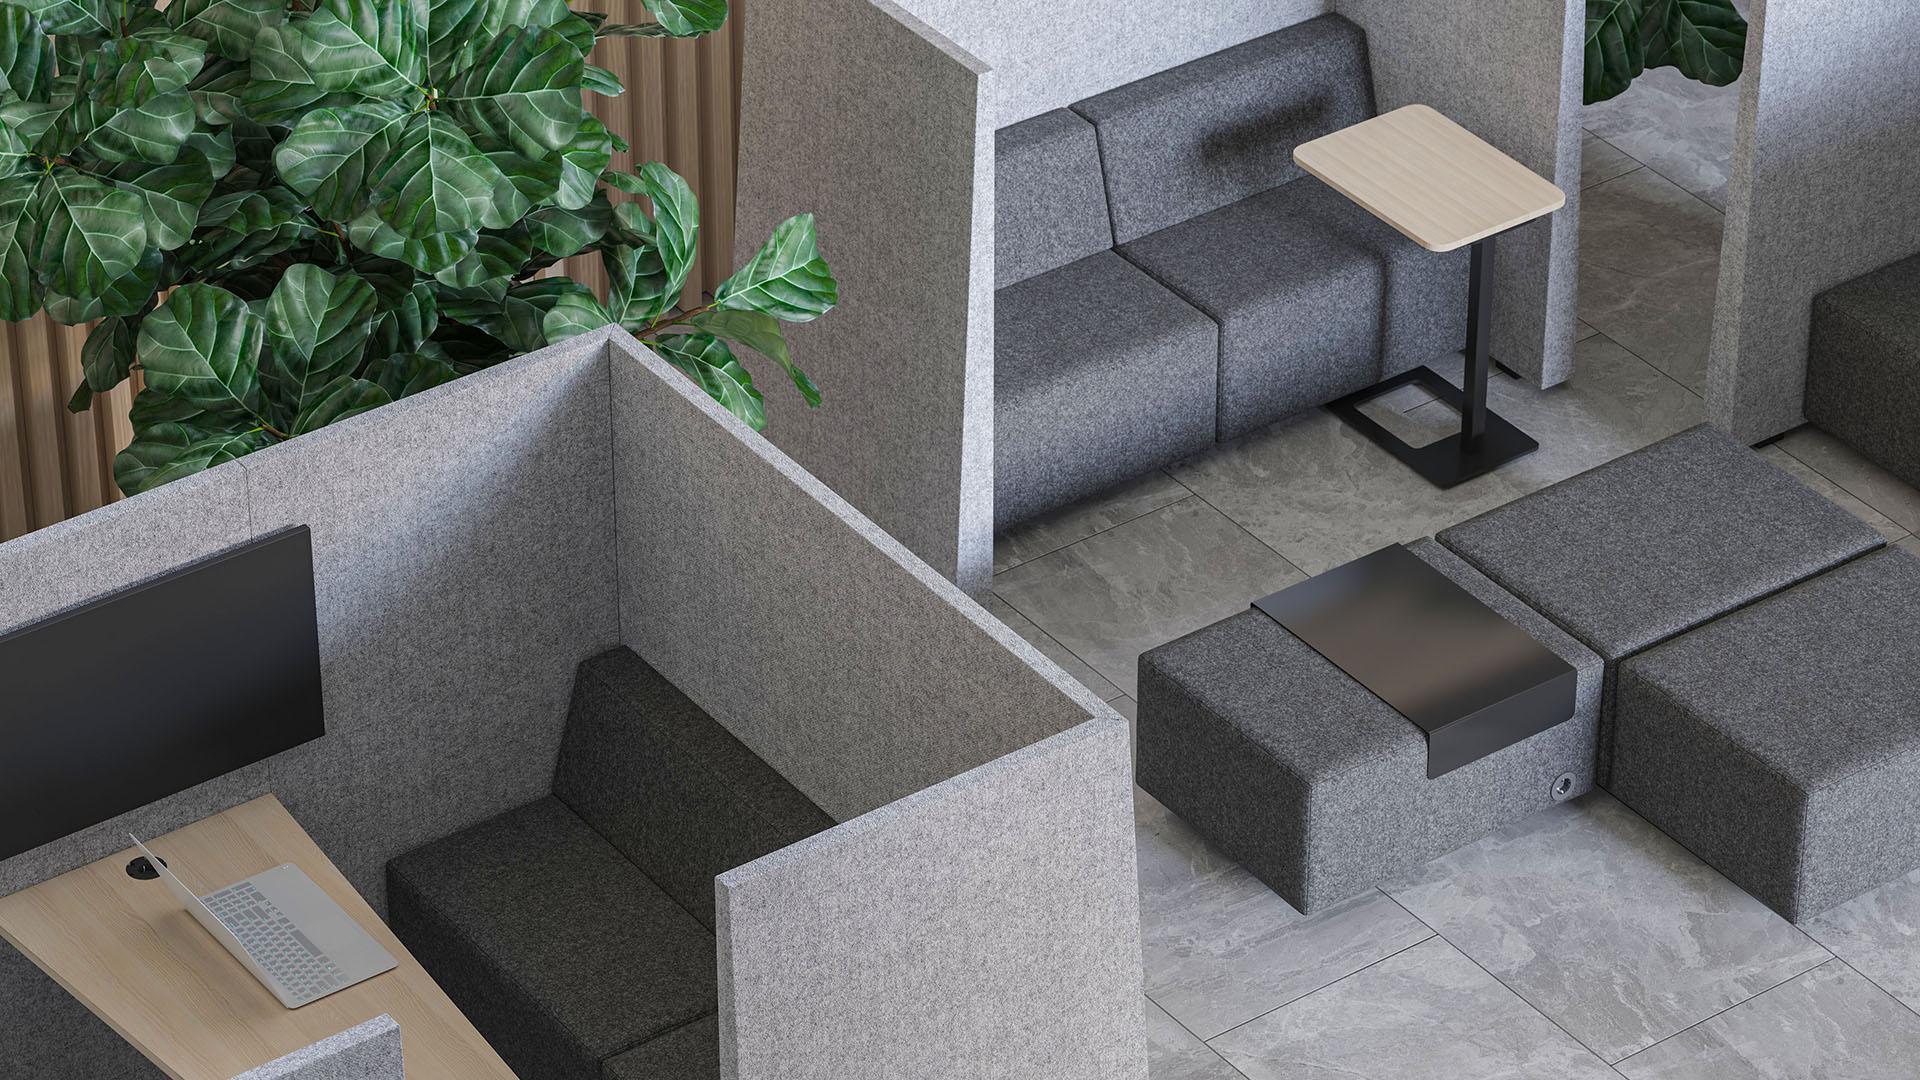 Jazz Silent Box combines with Jazz soft seating to create comfortable acoustic breakout areas